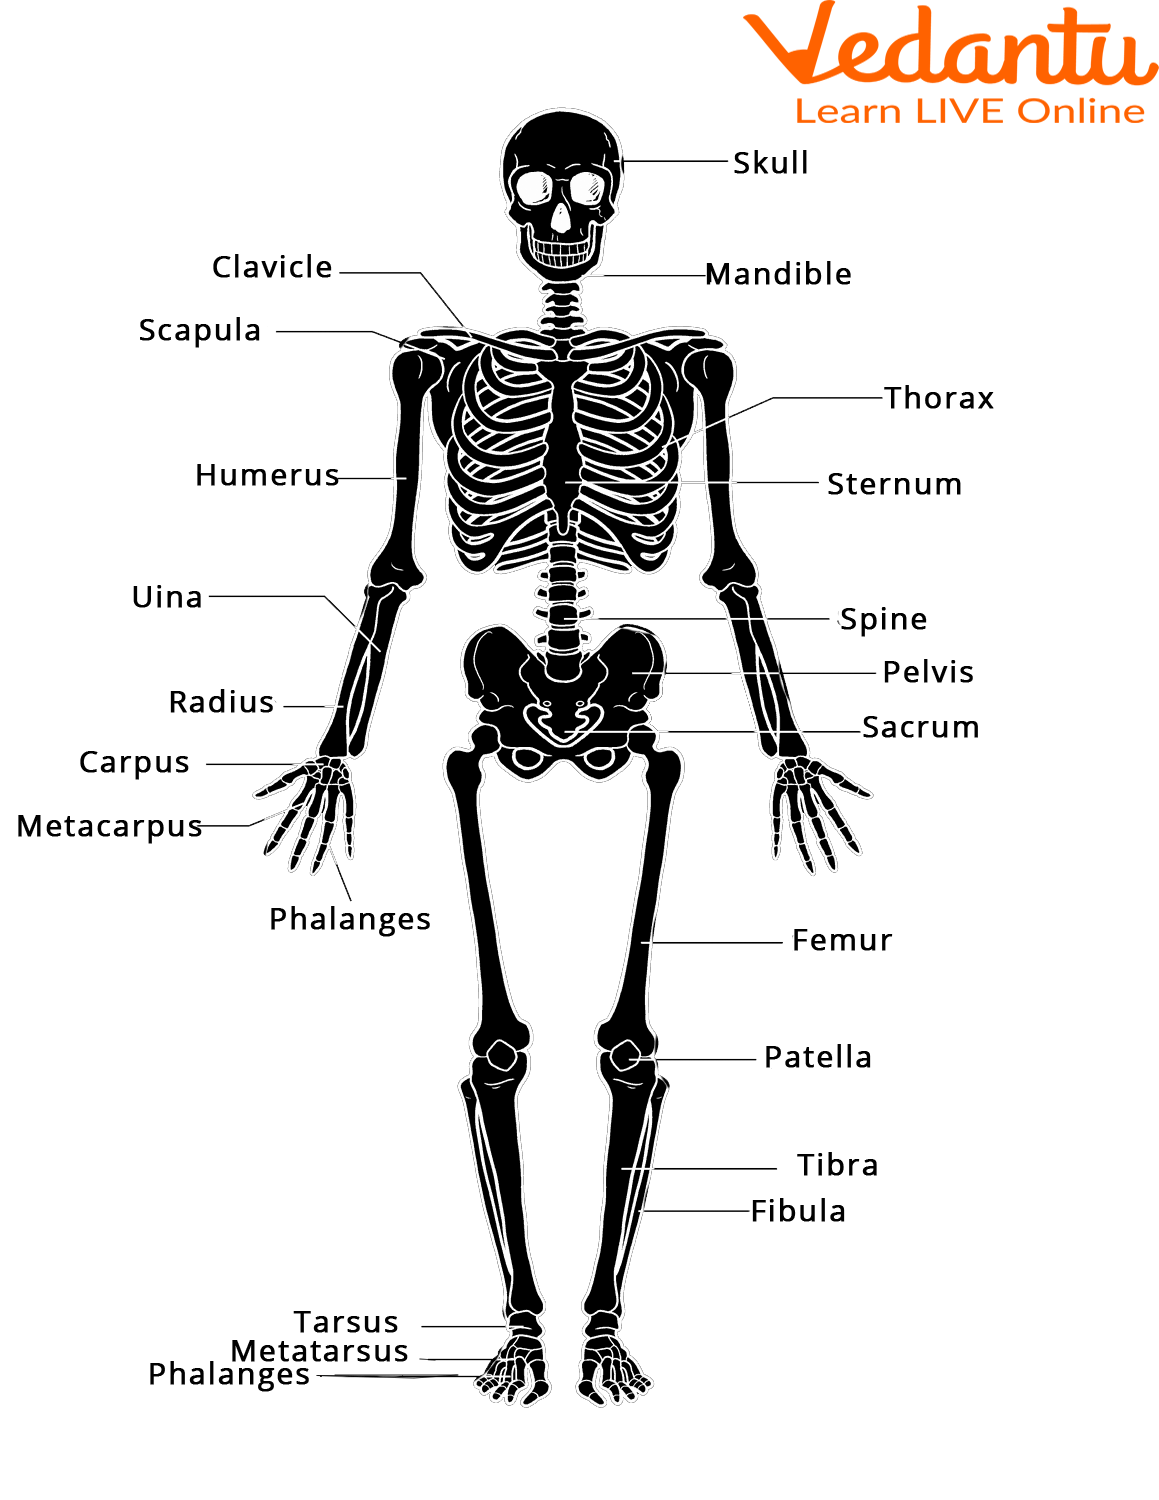 Human Skeletal System - Learn Definition, Functions and Facts